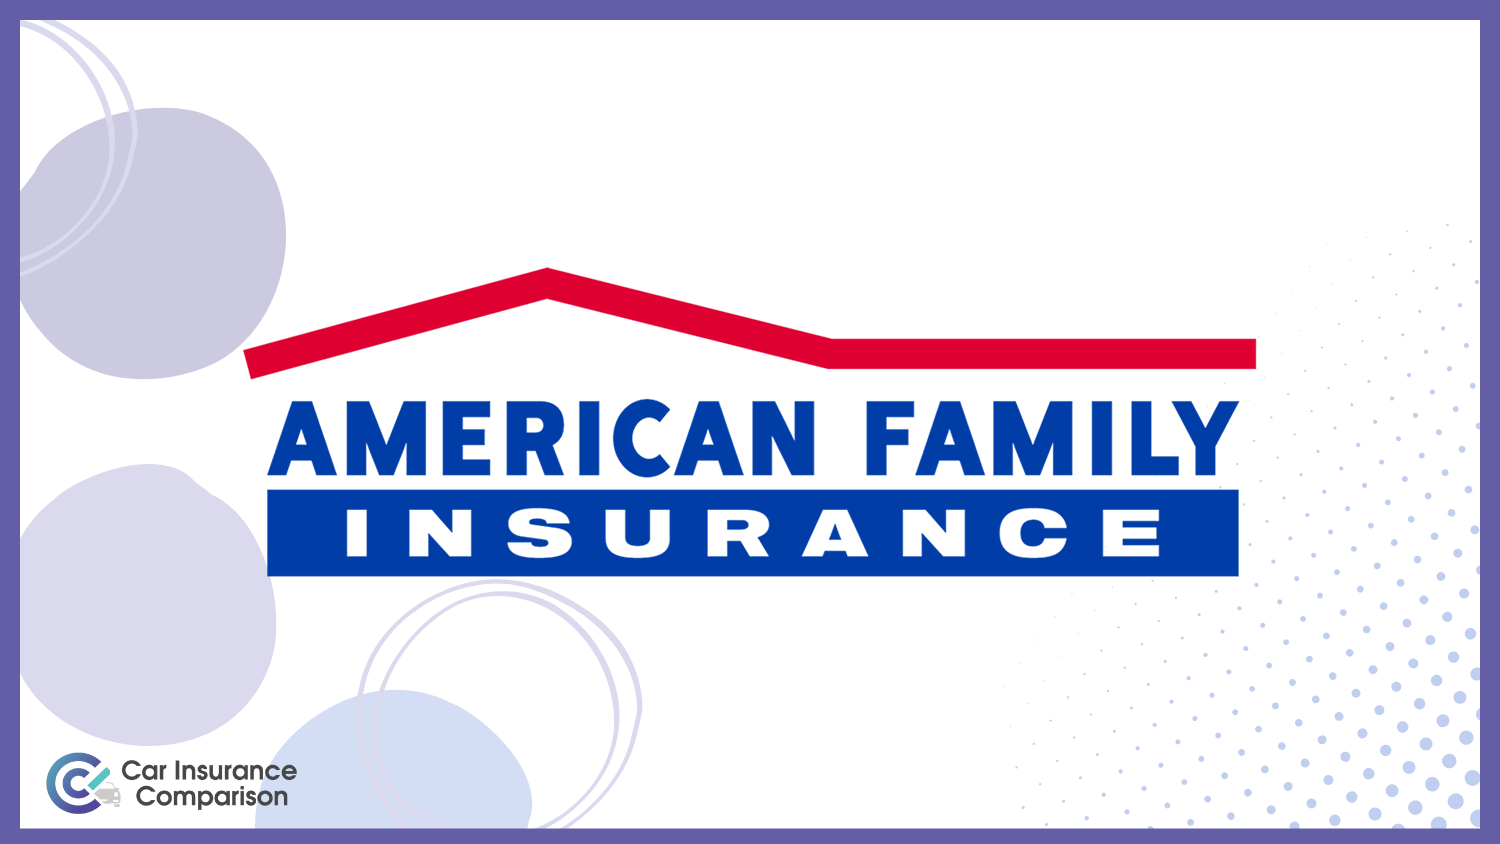 American Family: Best Car Insurance for Home-Care Worker